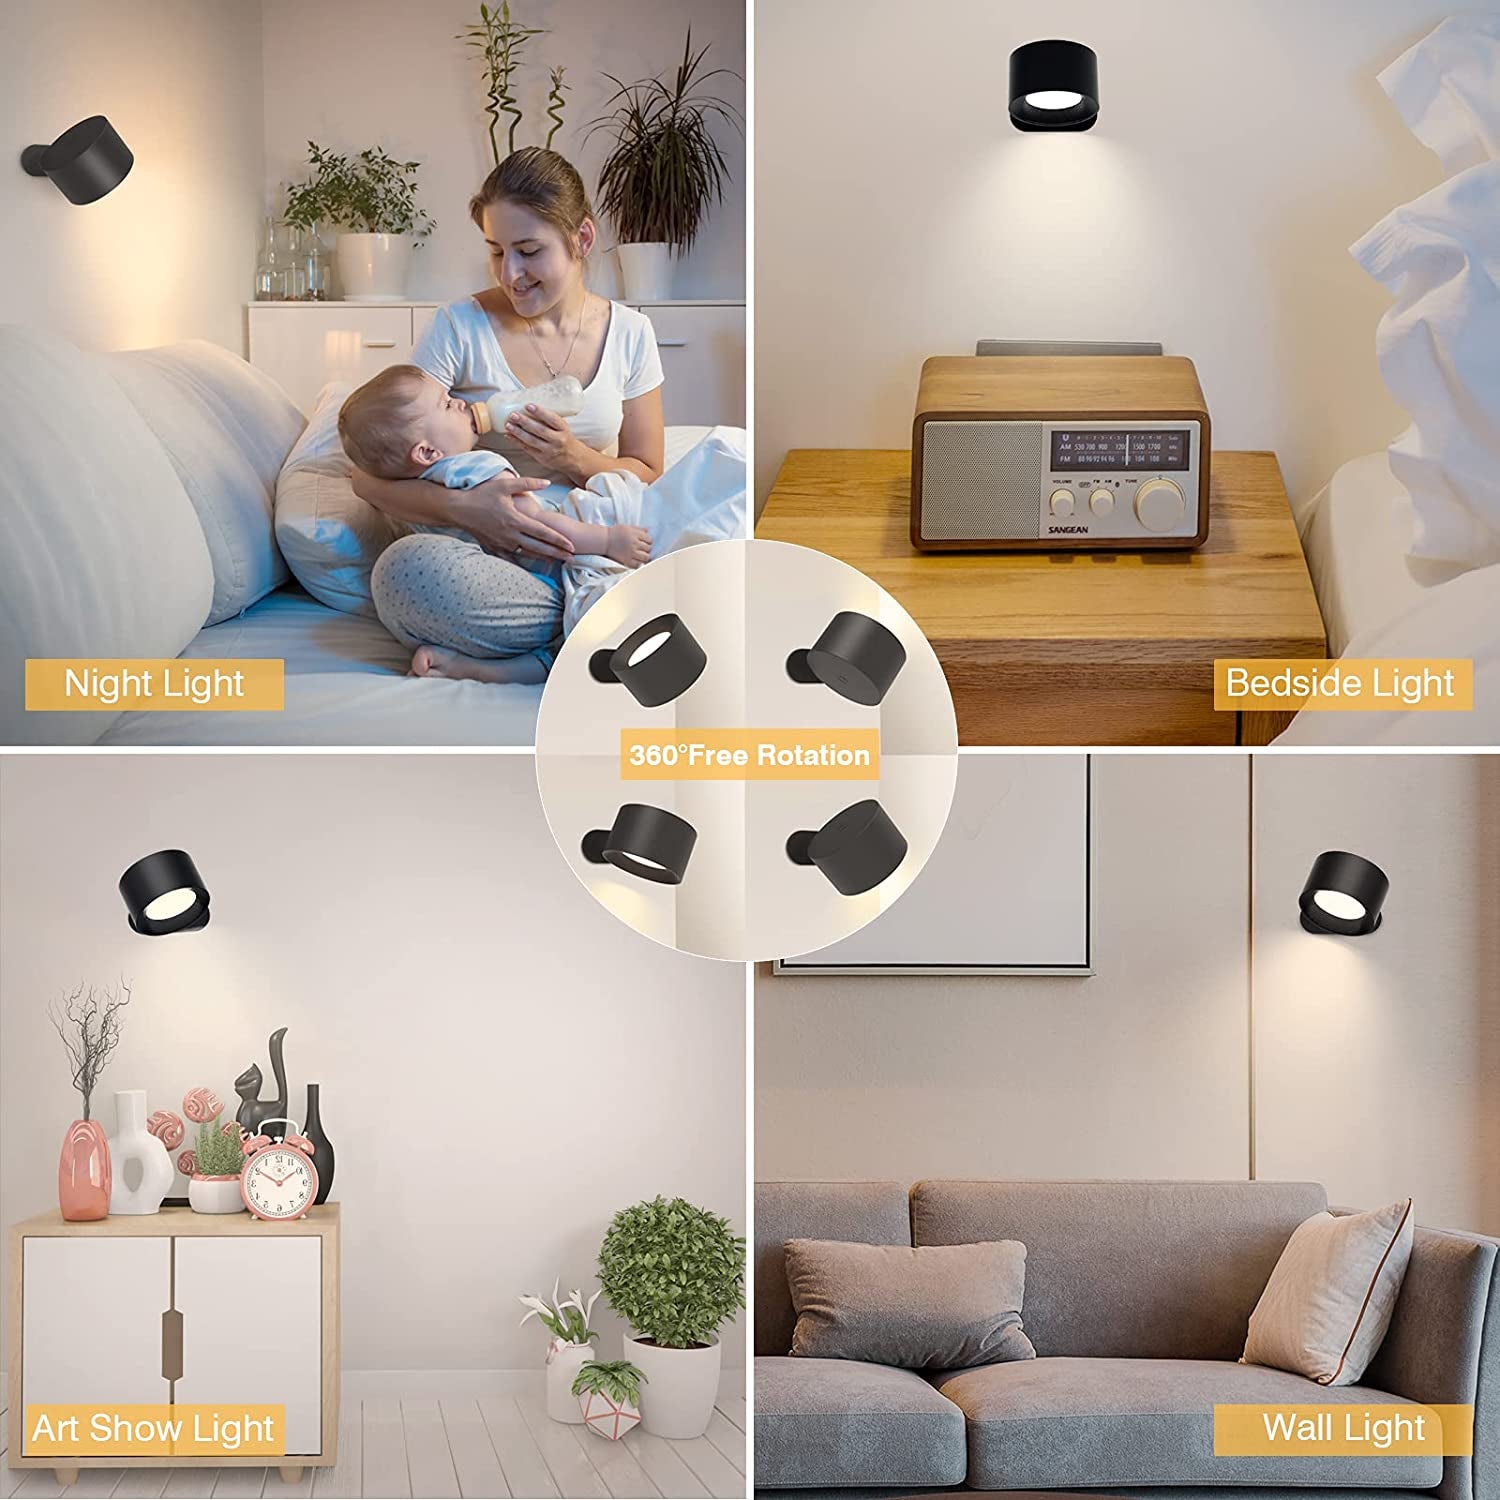 LED Reading Lights, Wall Mounted Sconces with 3 Color Temperatures & 3 Brightness Levels Rechargeable Battery Magnetic Ball 360°Rotation Touch Control, Lamps for Kids Study Bedside Closet